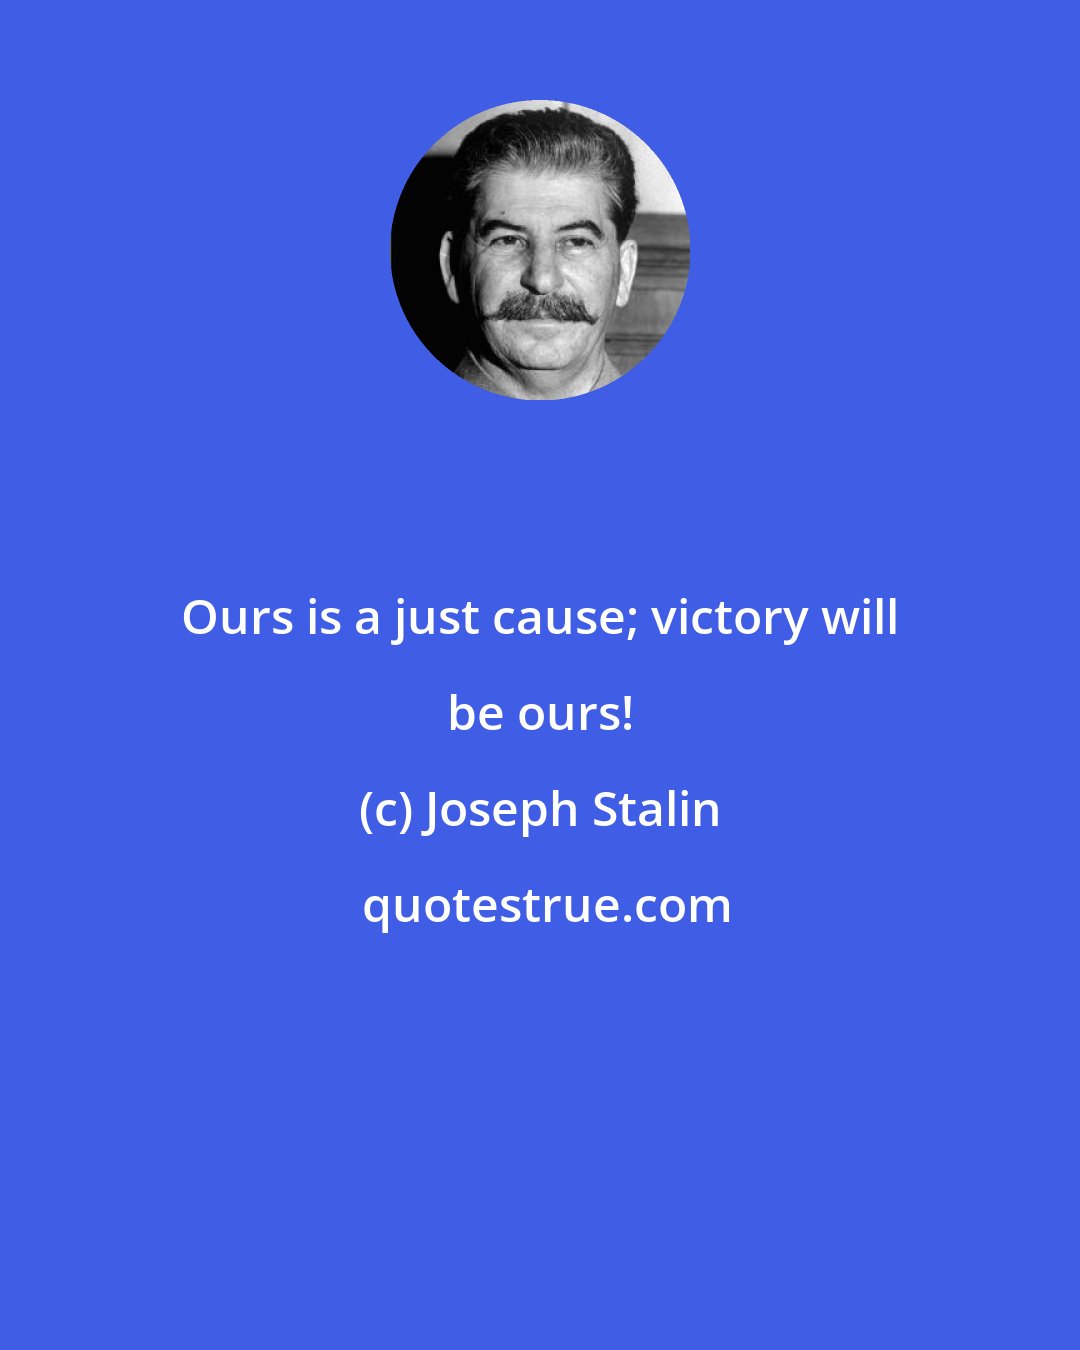 Joseph Stalin: Ours is a just cause; victory will be ours!